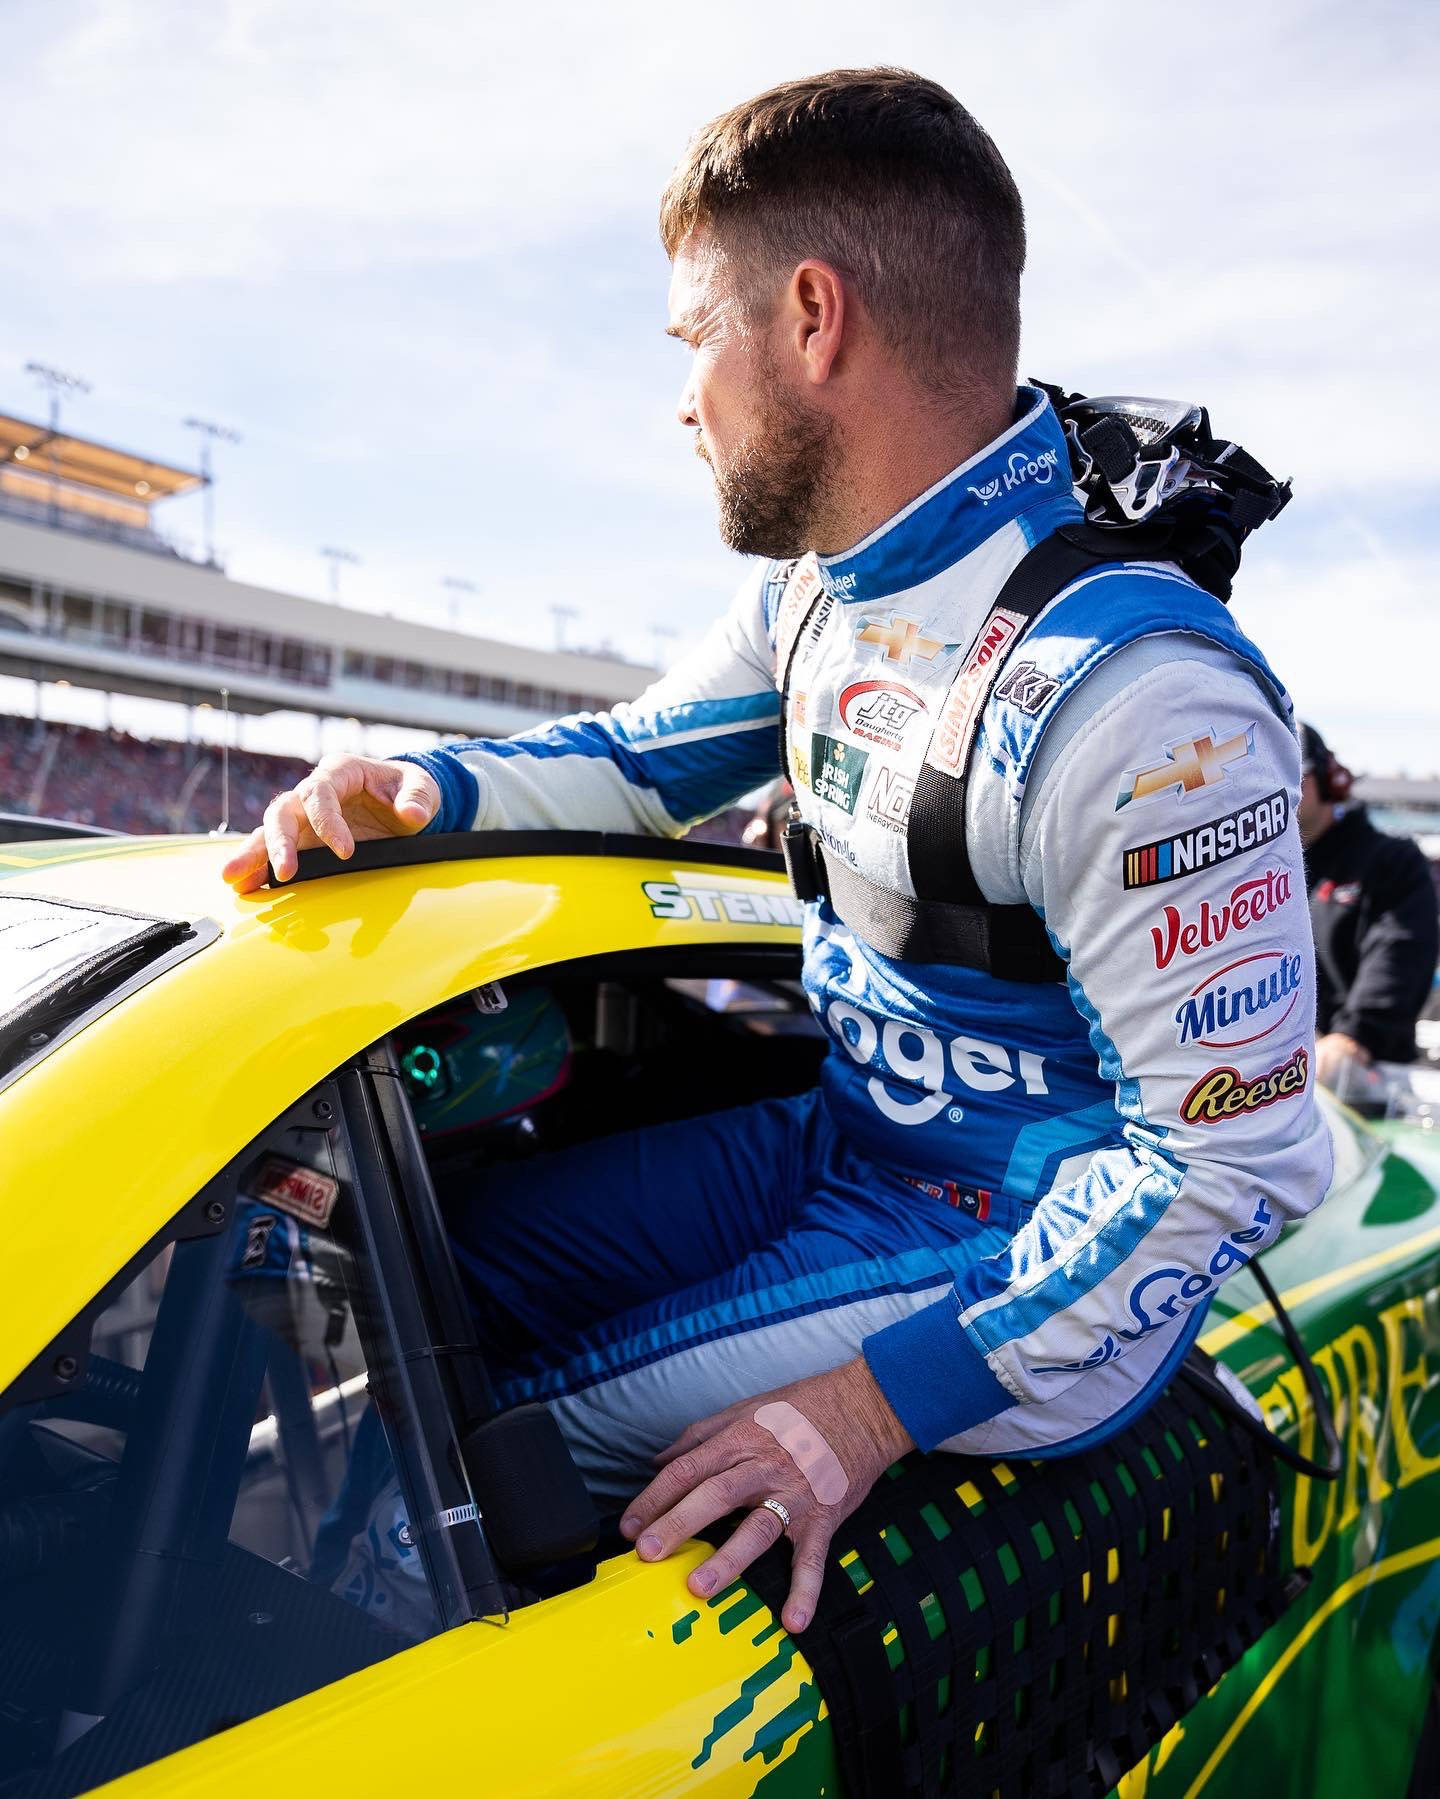 Ricky Stenhouse Jr. exiting his race car at a NASCAR event. Wallpaper